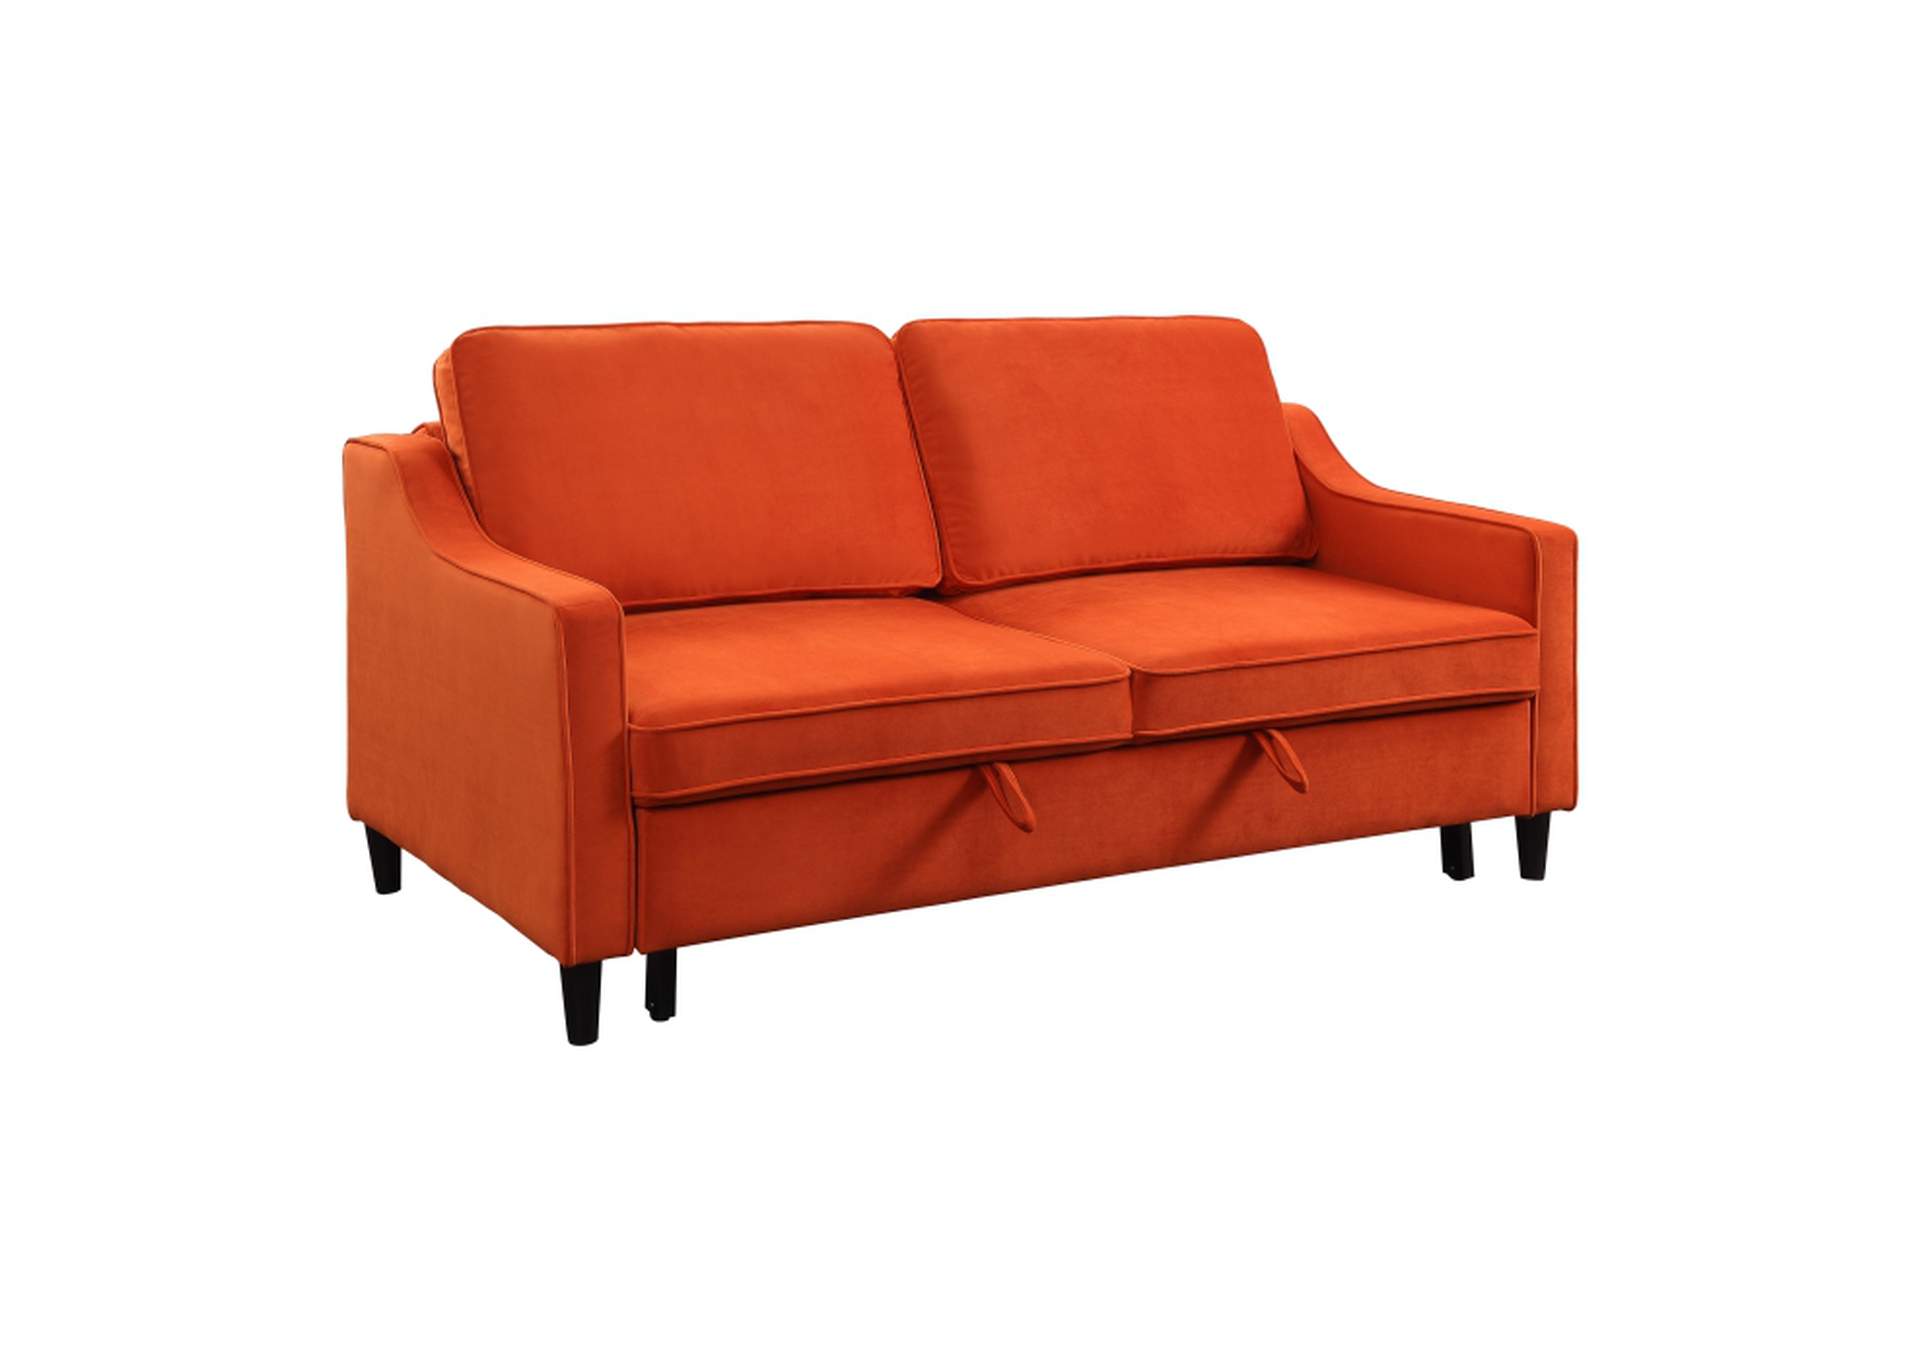 Adelia Convertible Studio Sofa with Pull-out Bed,Homelegance